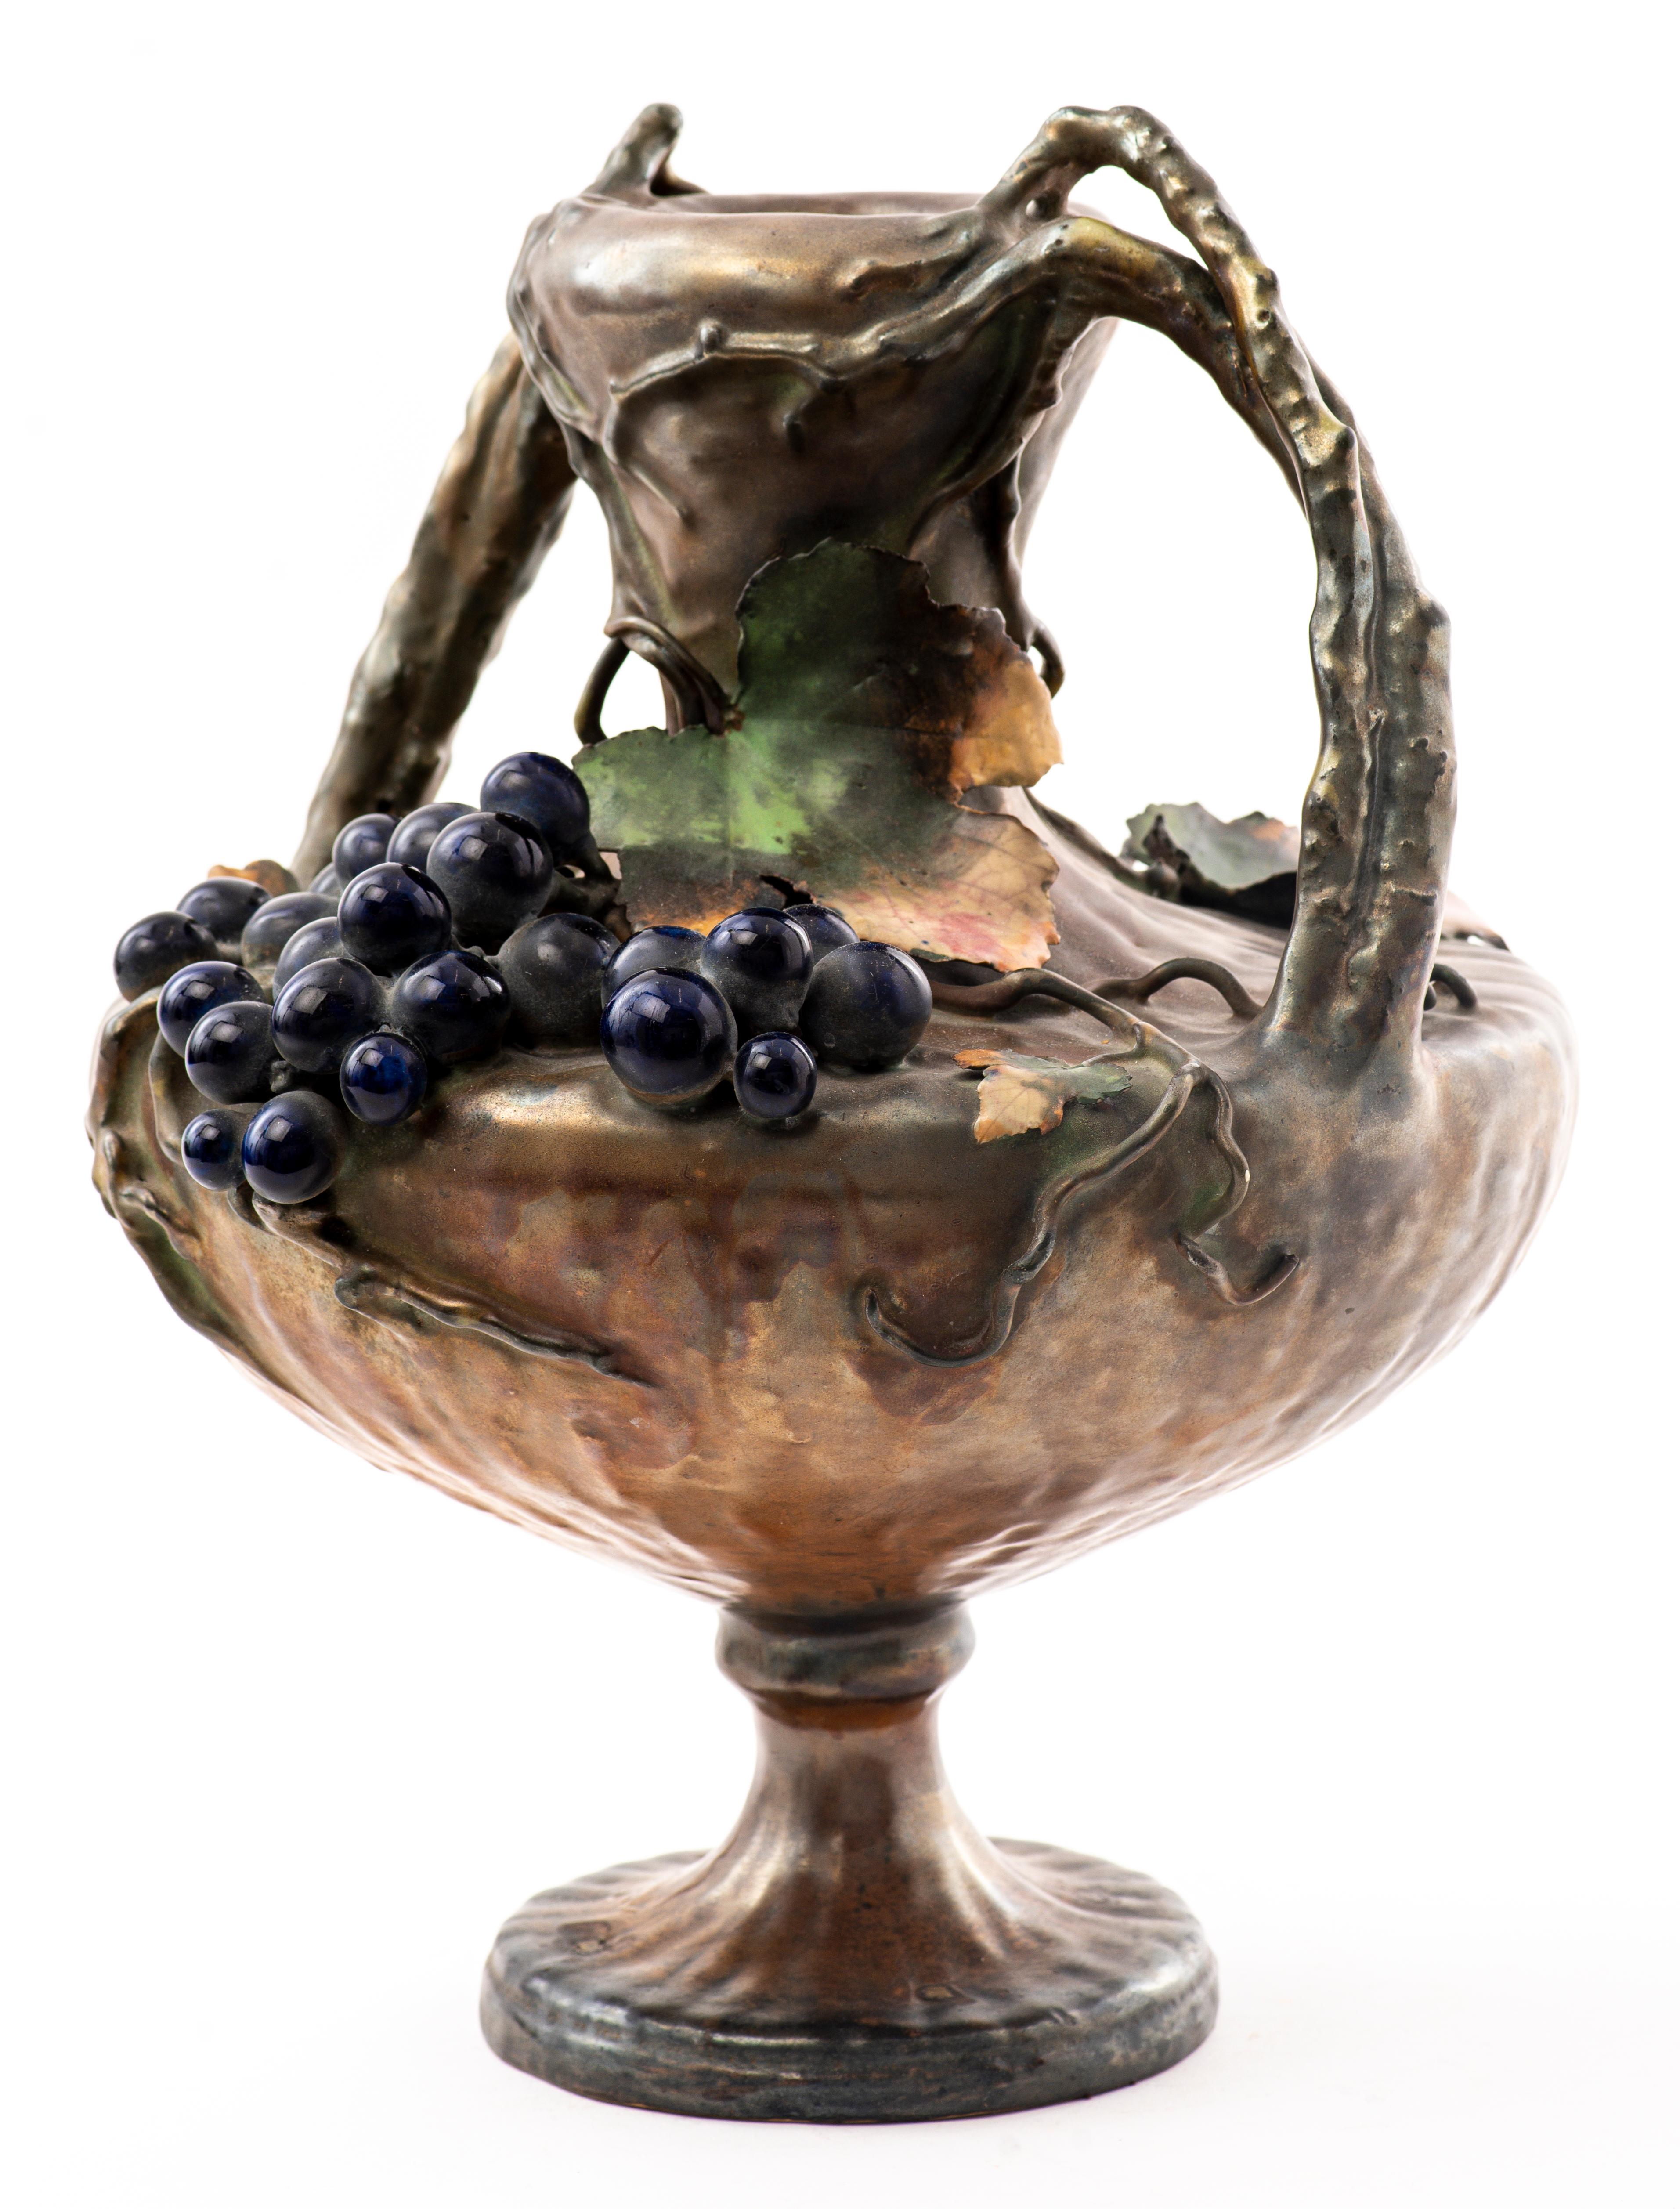 Amphora Austrian Art Nouveau semi-iridescent ceramic two-handled vase decorated with hanging grape cluster and vines and leaves. Marked and numbered on bottom.
Dimensions: 14